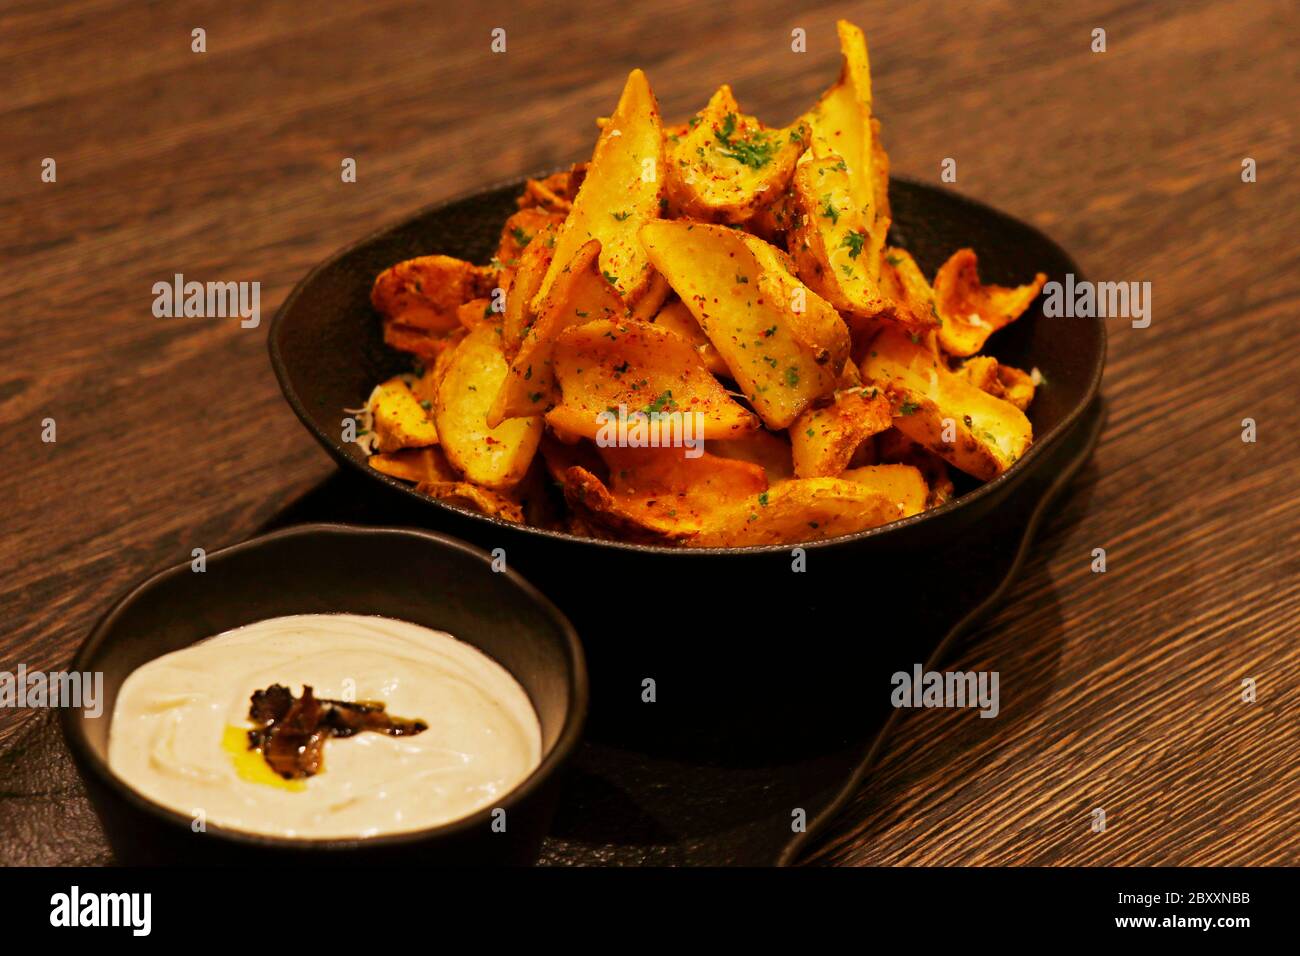 crispy fried potato chips or wedges with truffle cream dip Stock Photo